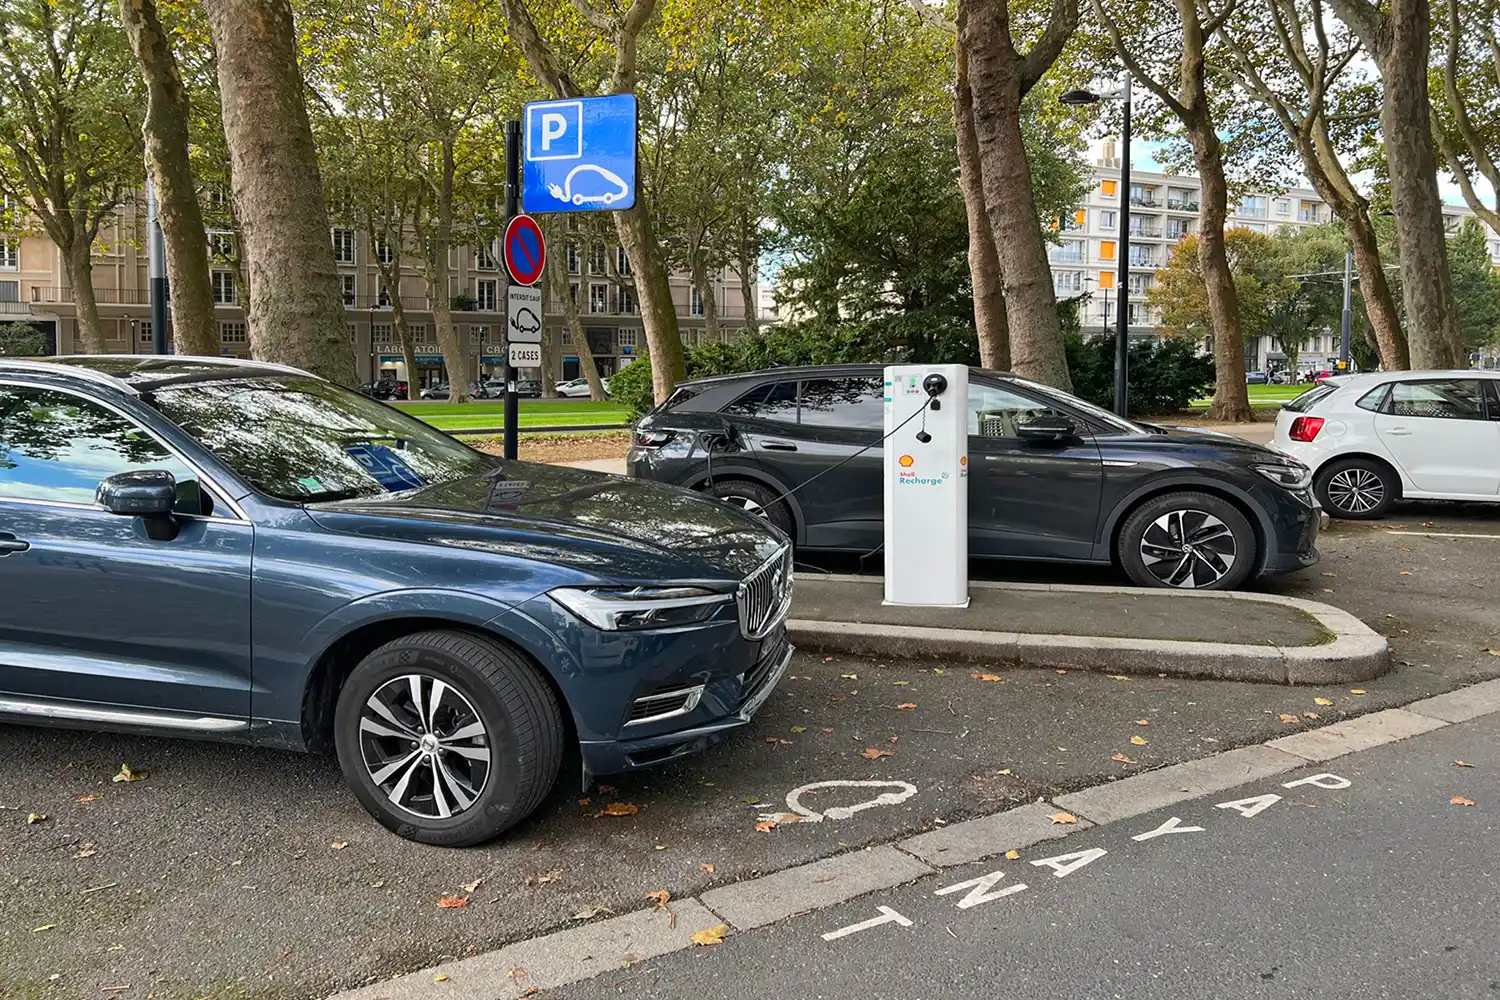 ubitricity to install more than 500 charge points in France’s Le Havre